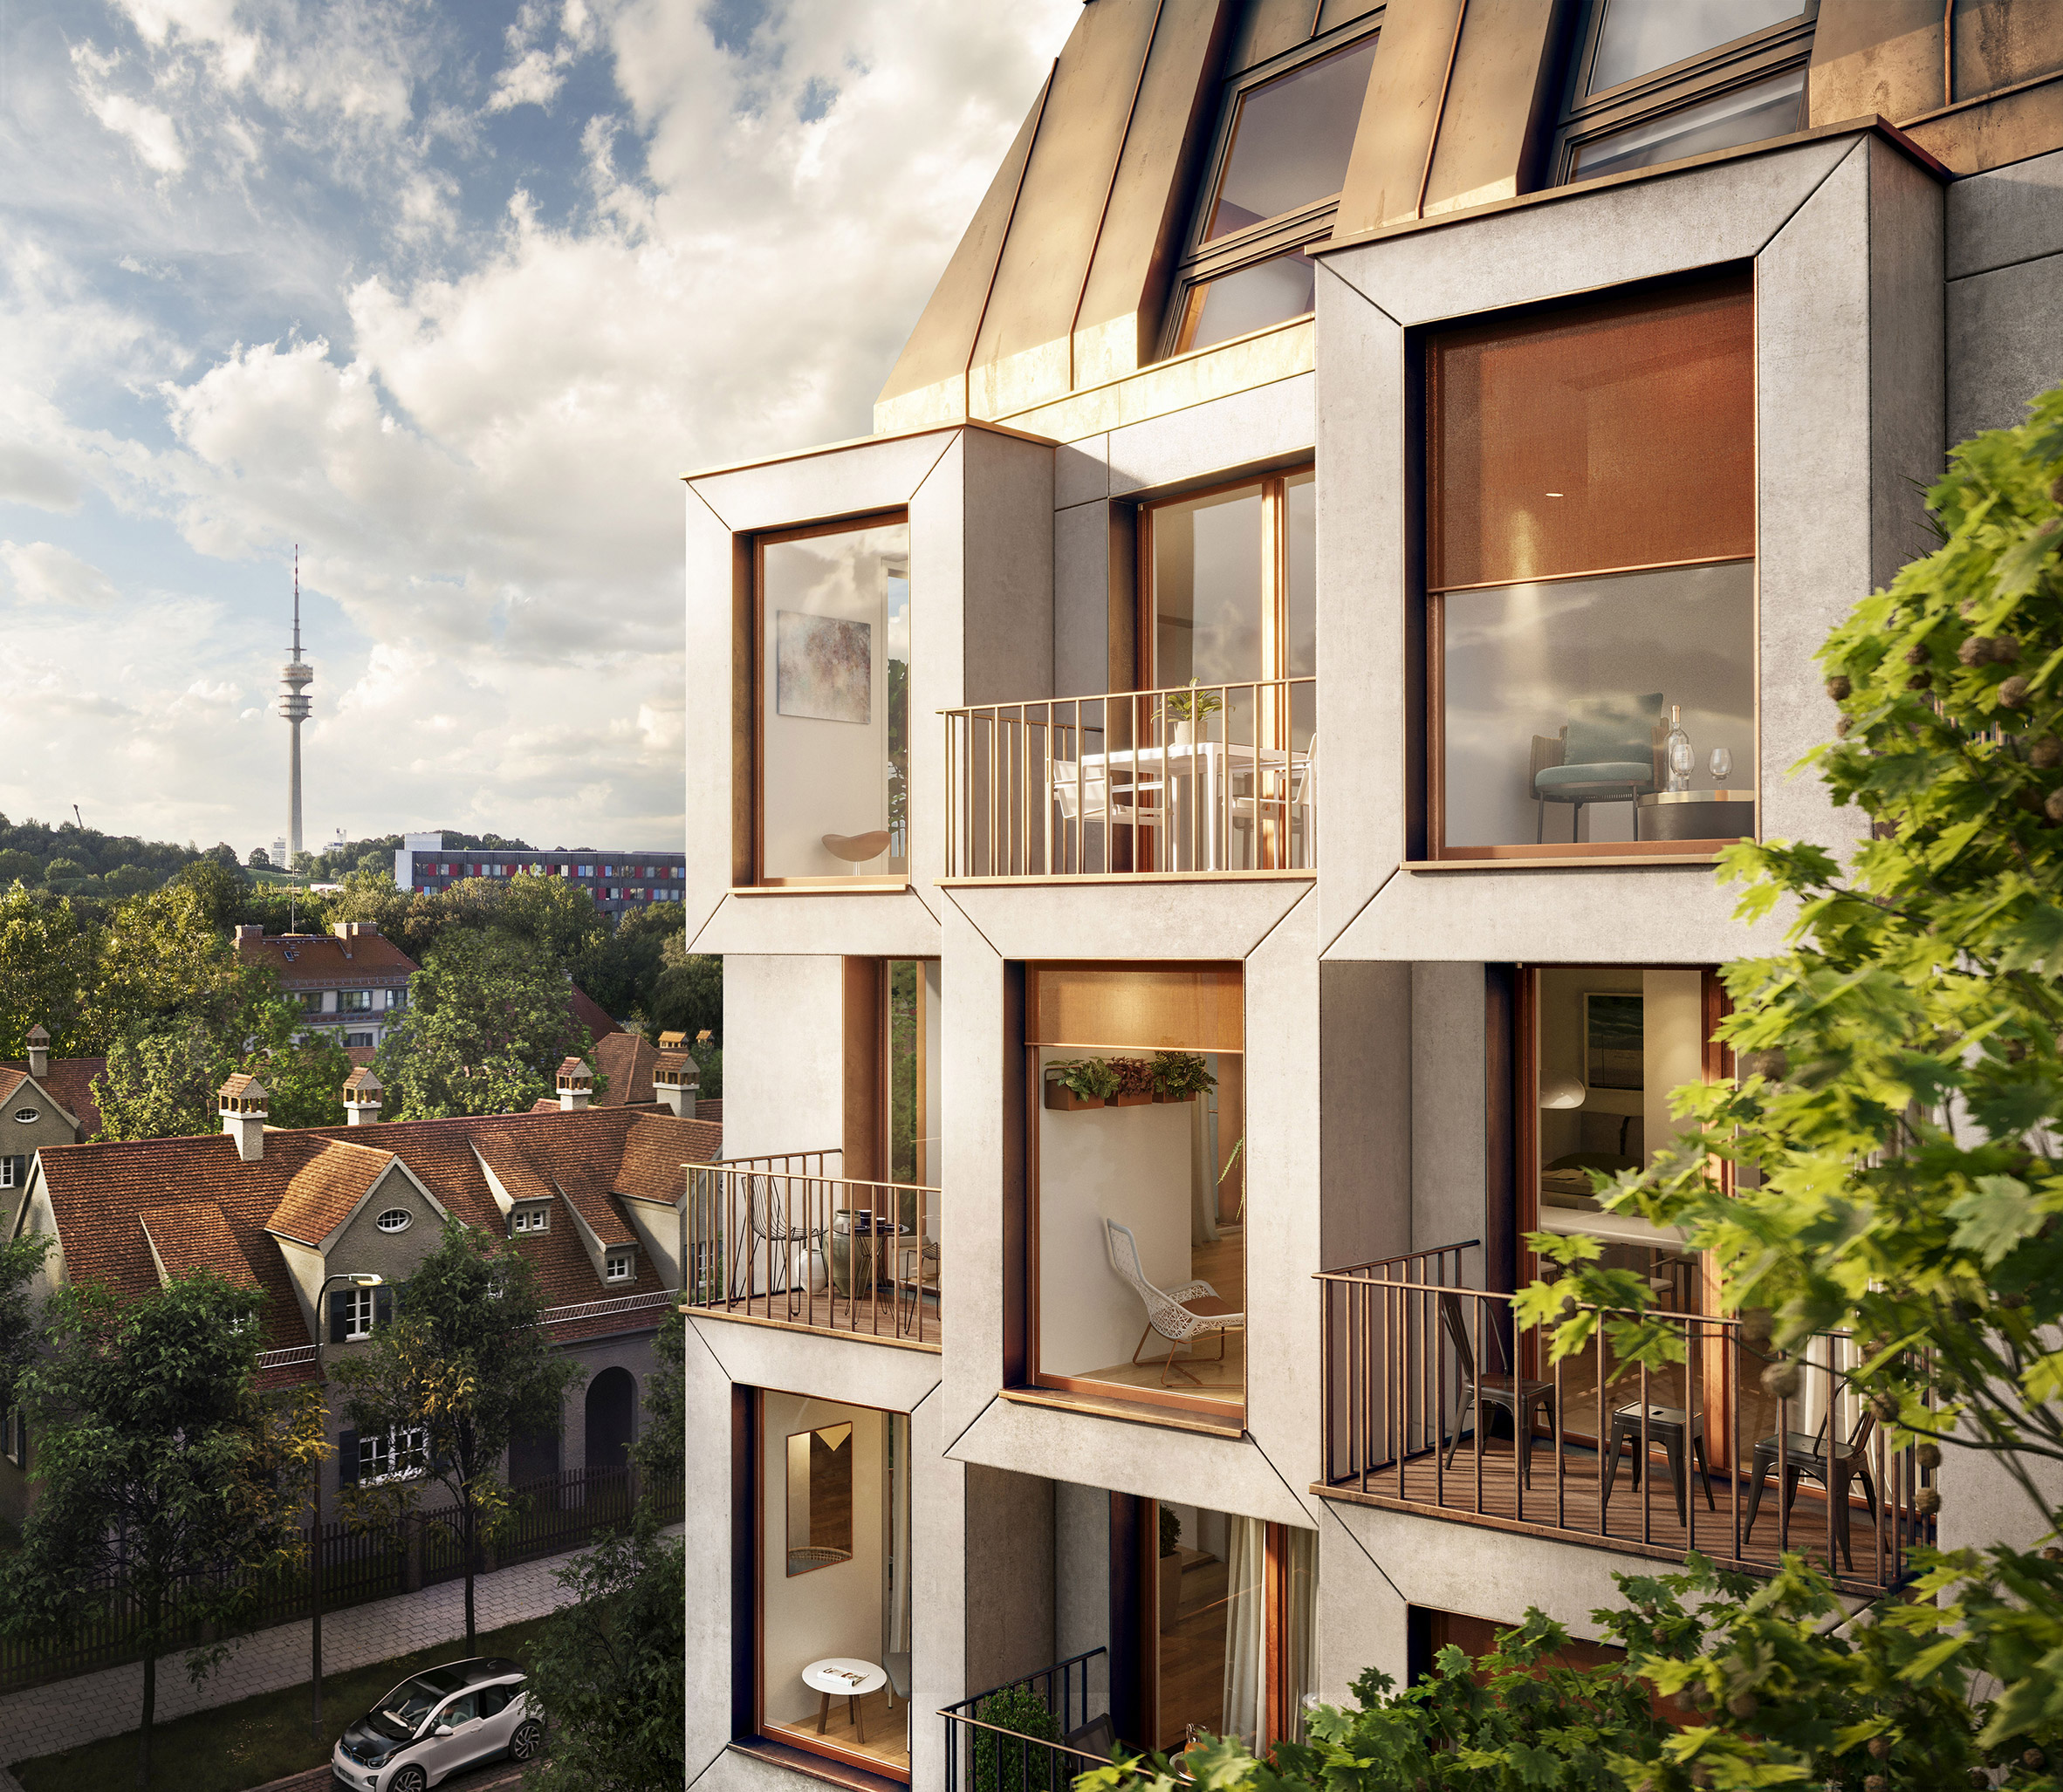 Apartments have views out to surrounding urban context